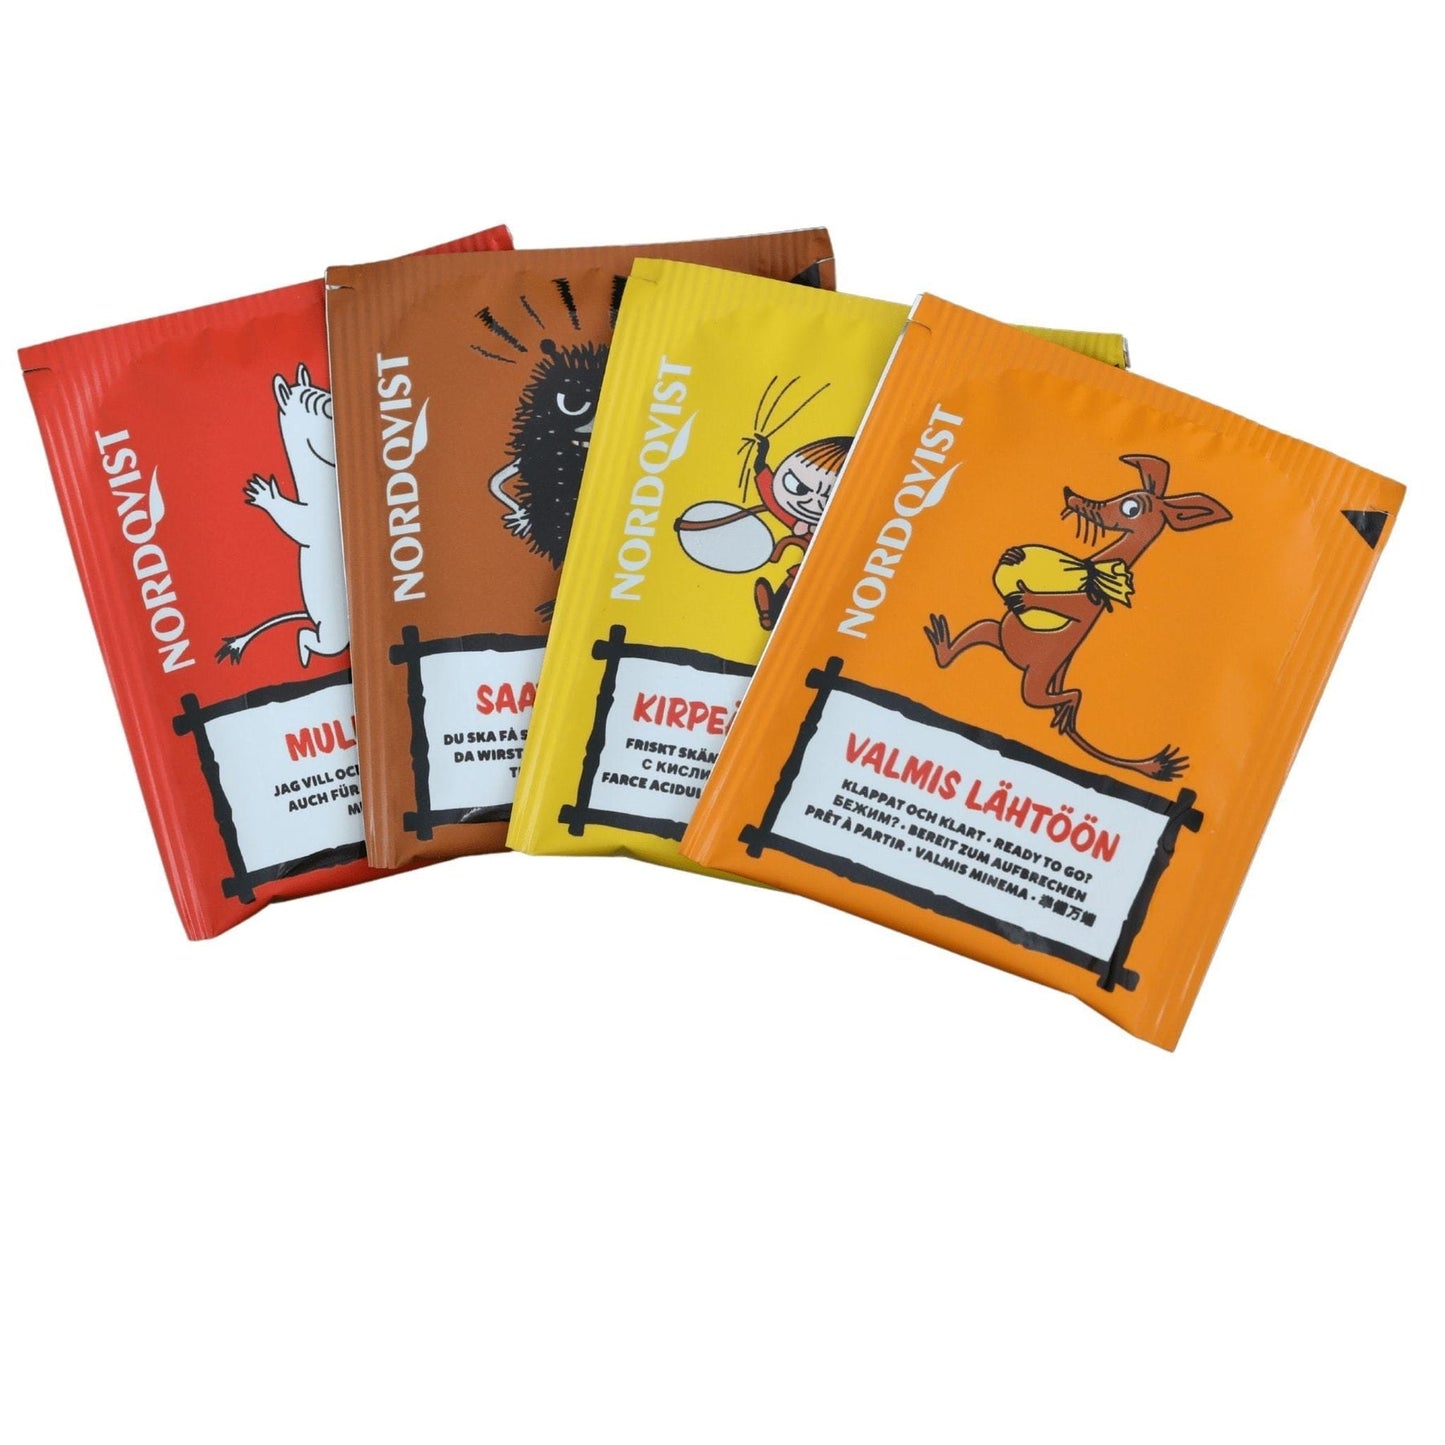 Nordqvist Moomin "All Things Fun Are Good For Your Tummy" Traditional Finnish Rooibos Bagged Tea